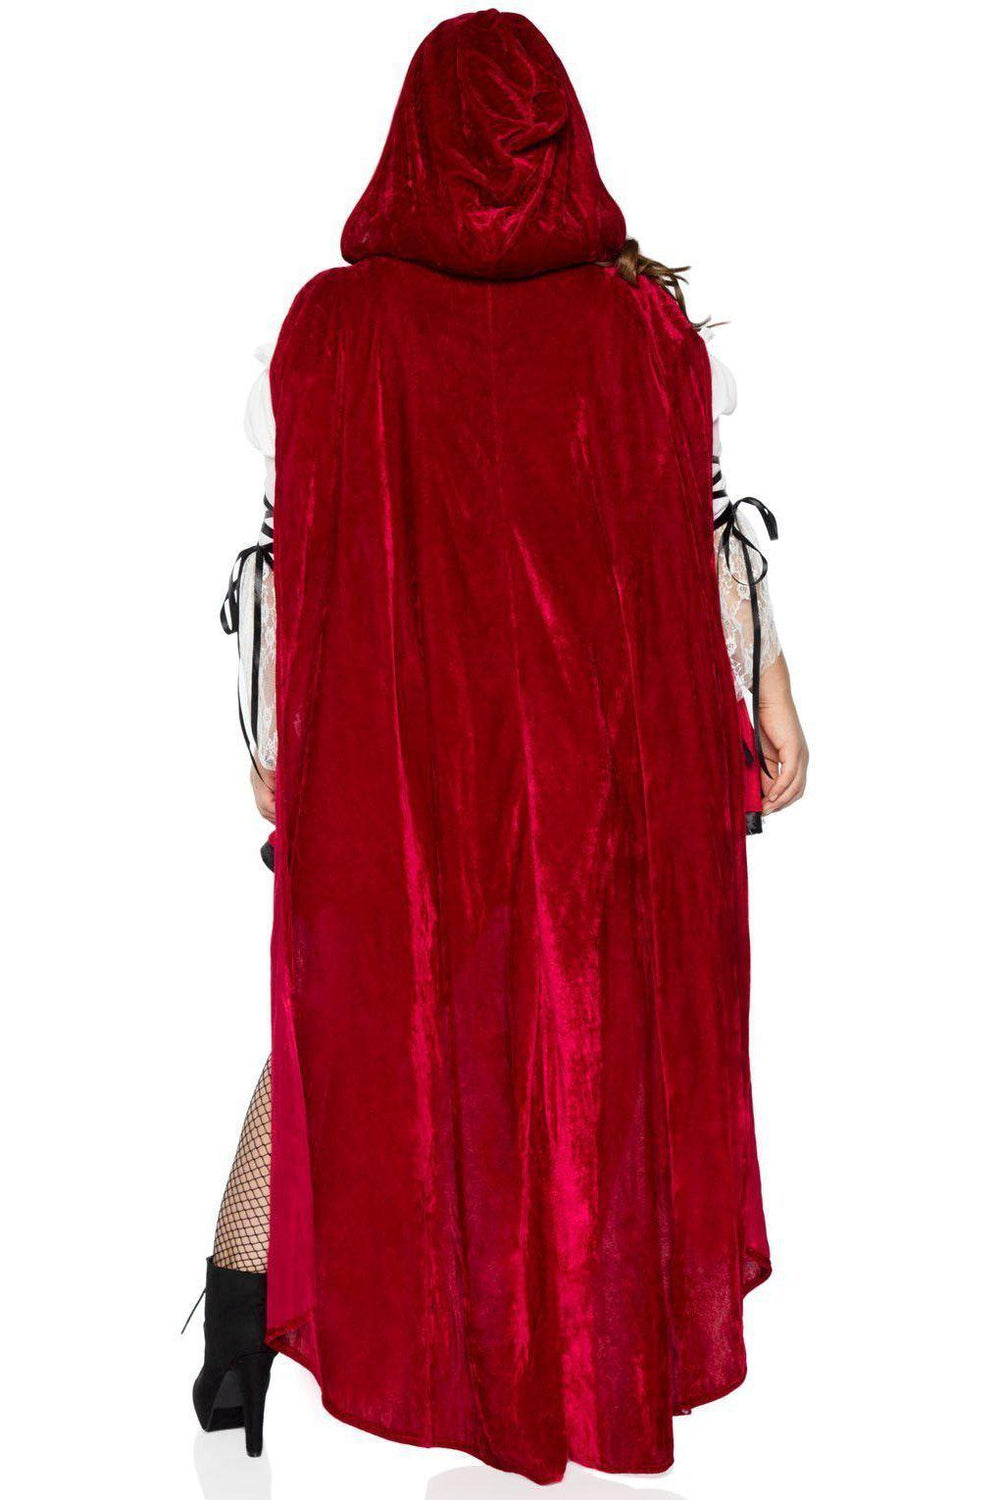 Plus Size Storybook Red Riding Hood Costume-Fairytale Costumes-Leg Avenue-SEXYSHOES.COM